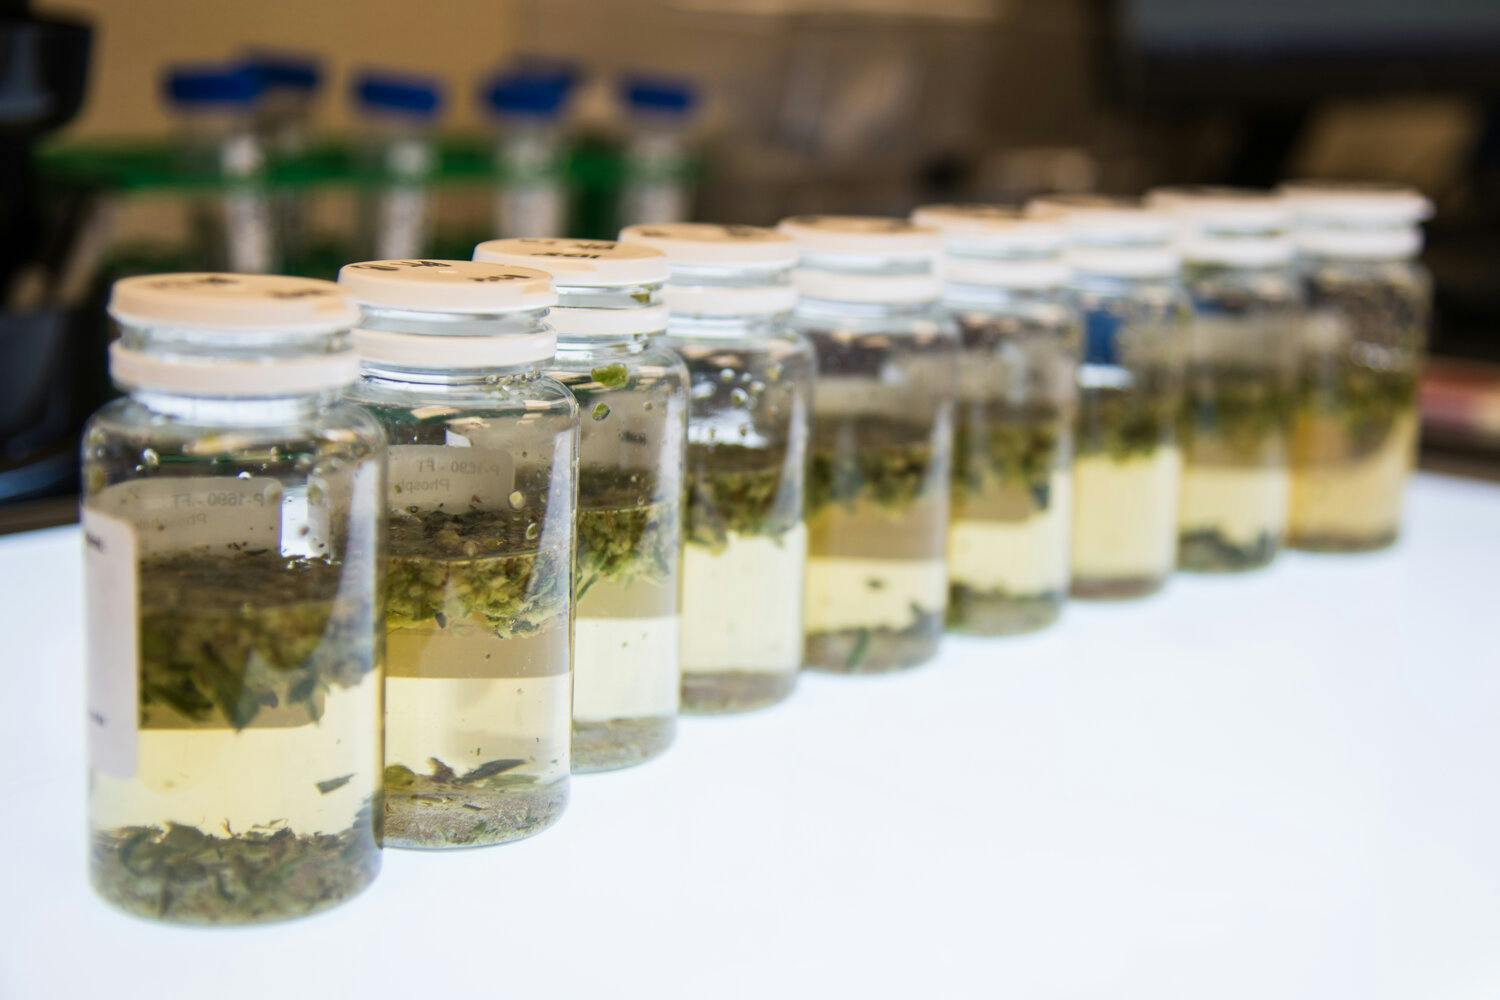 Caliva Labs is studying more than 100 terpenes in its methodical product development process.